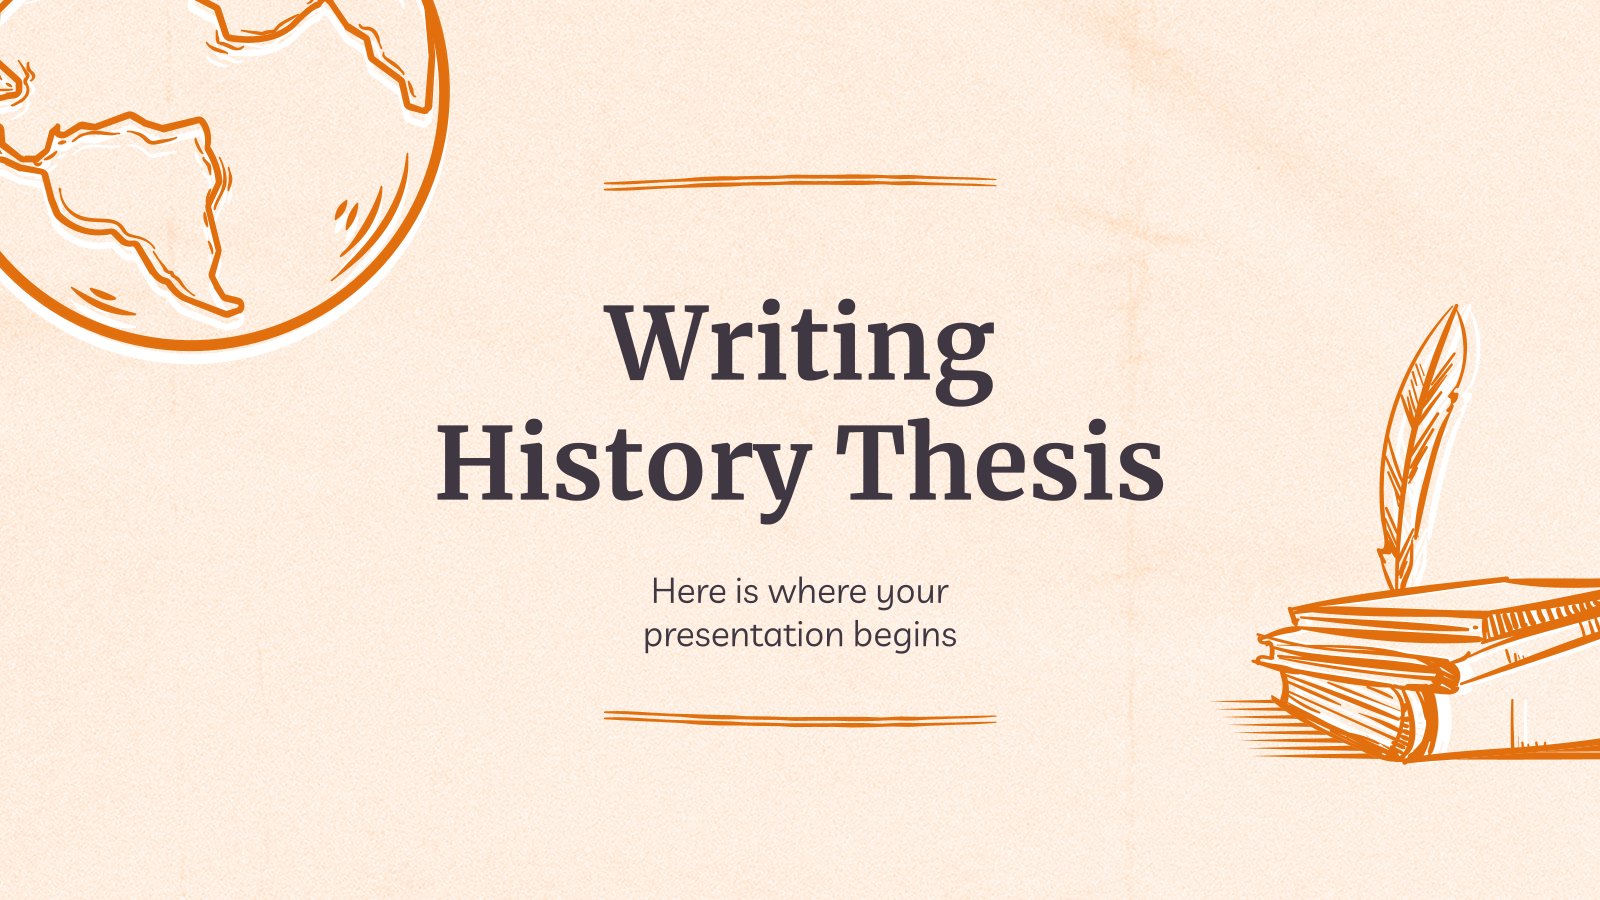 Writing History Thesis presentation template 